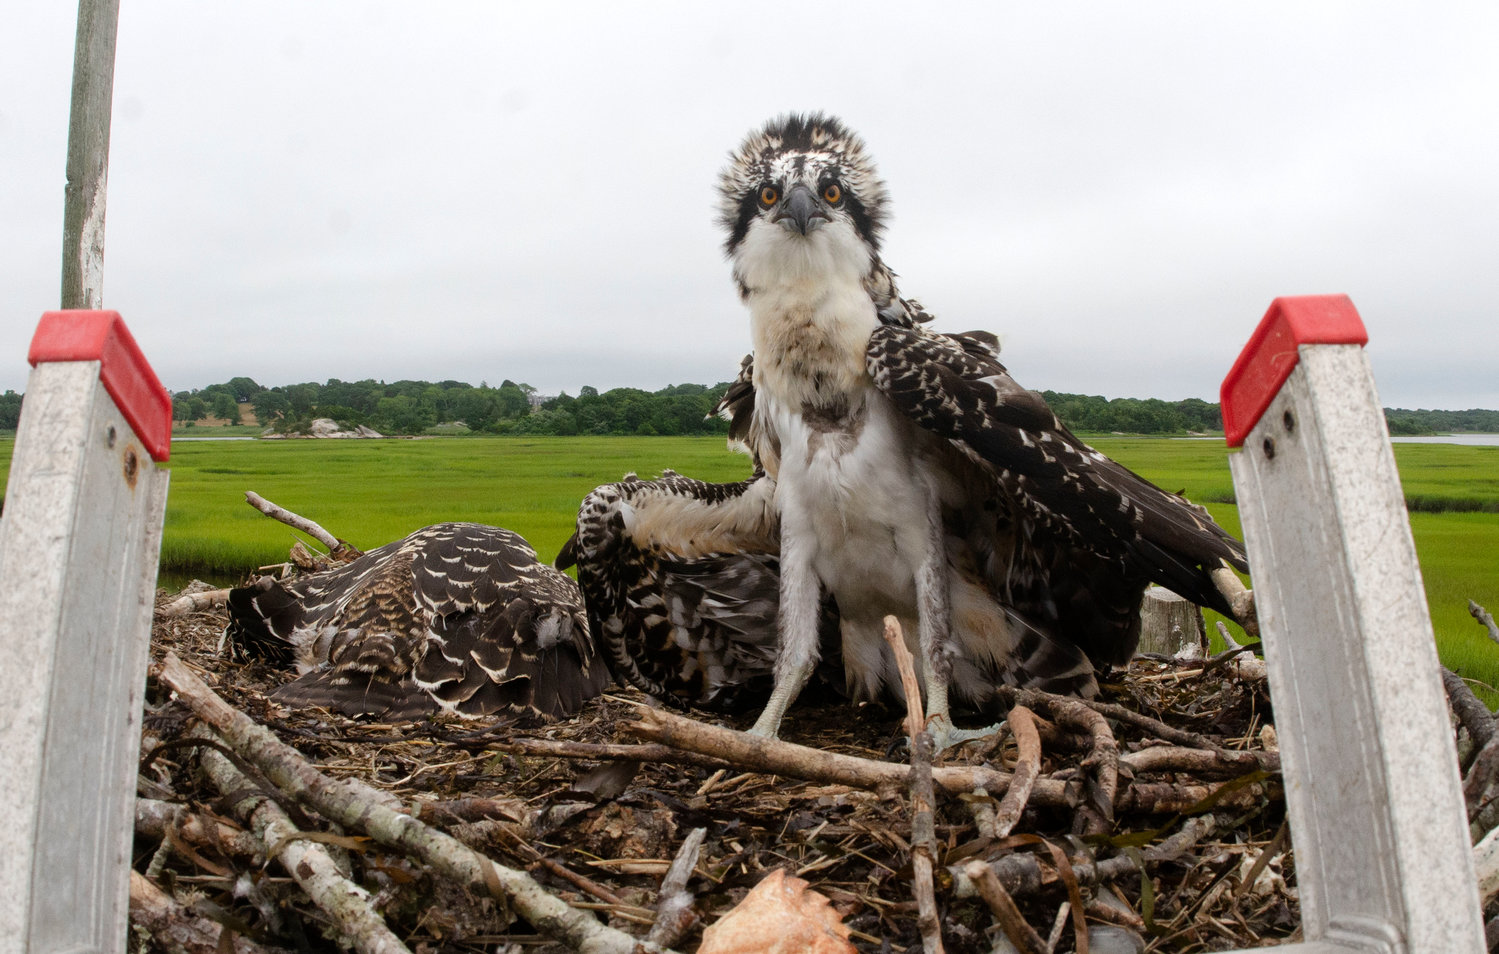 An osprey fledgling looks into the camera as a photographer climbs the ladder and peers into the nest.